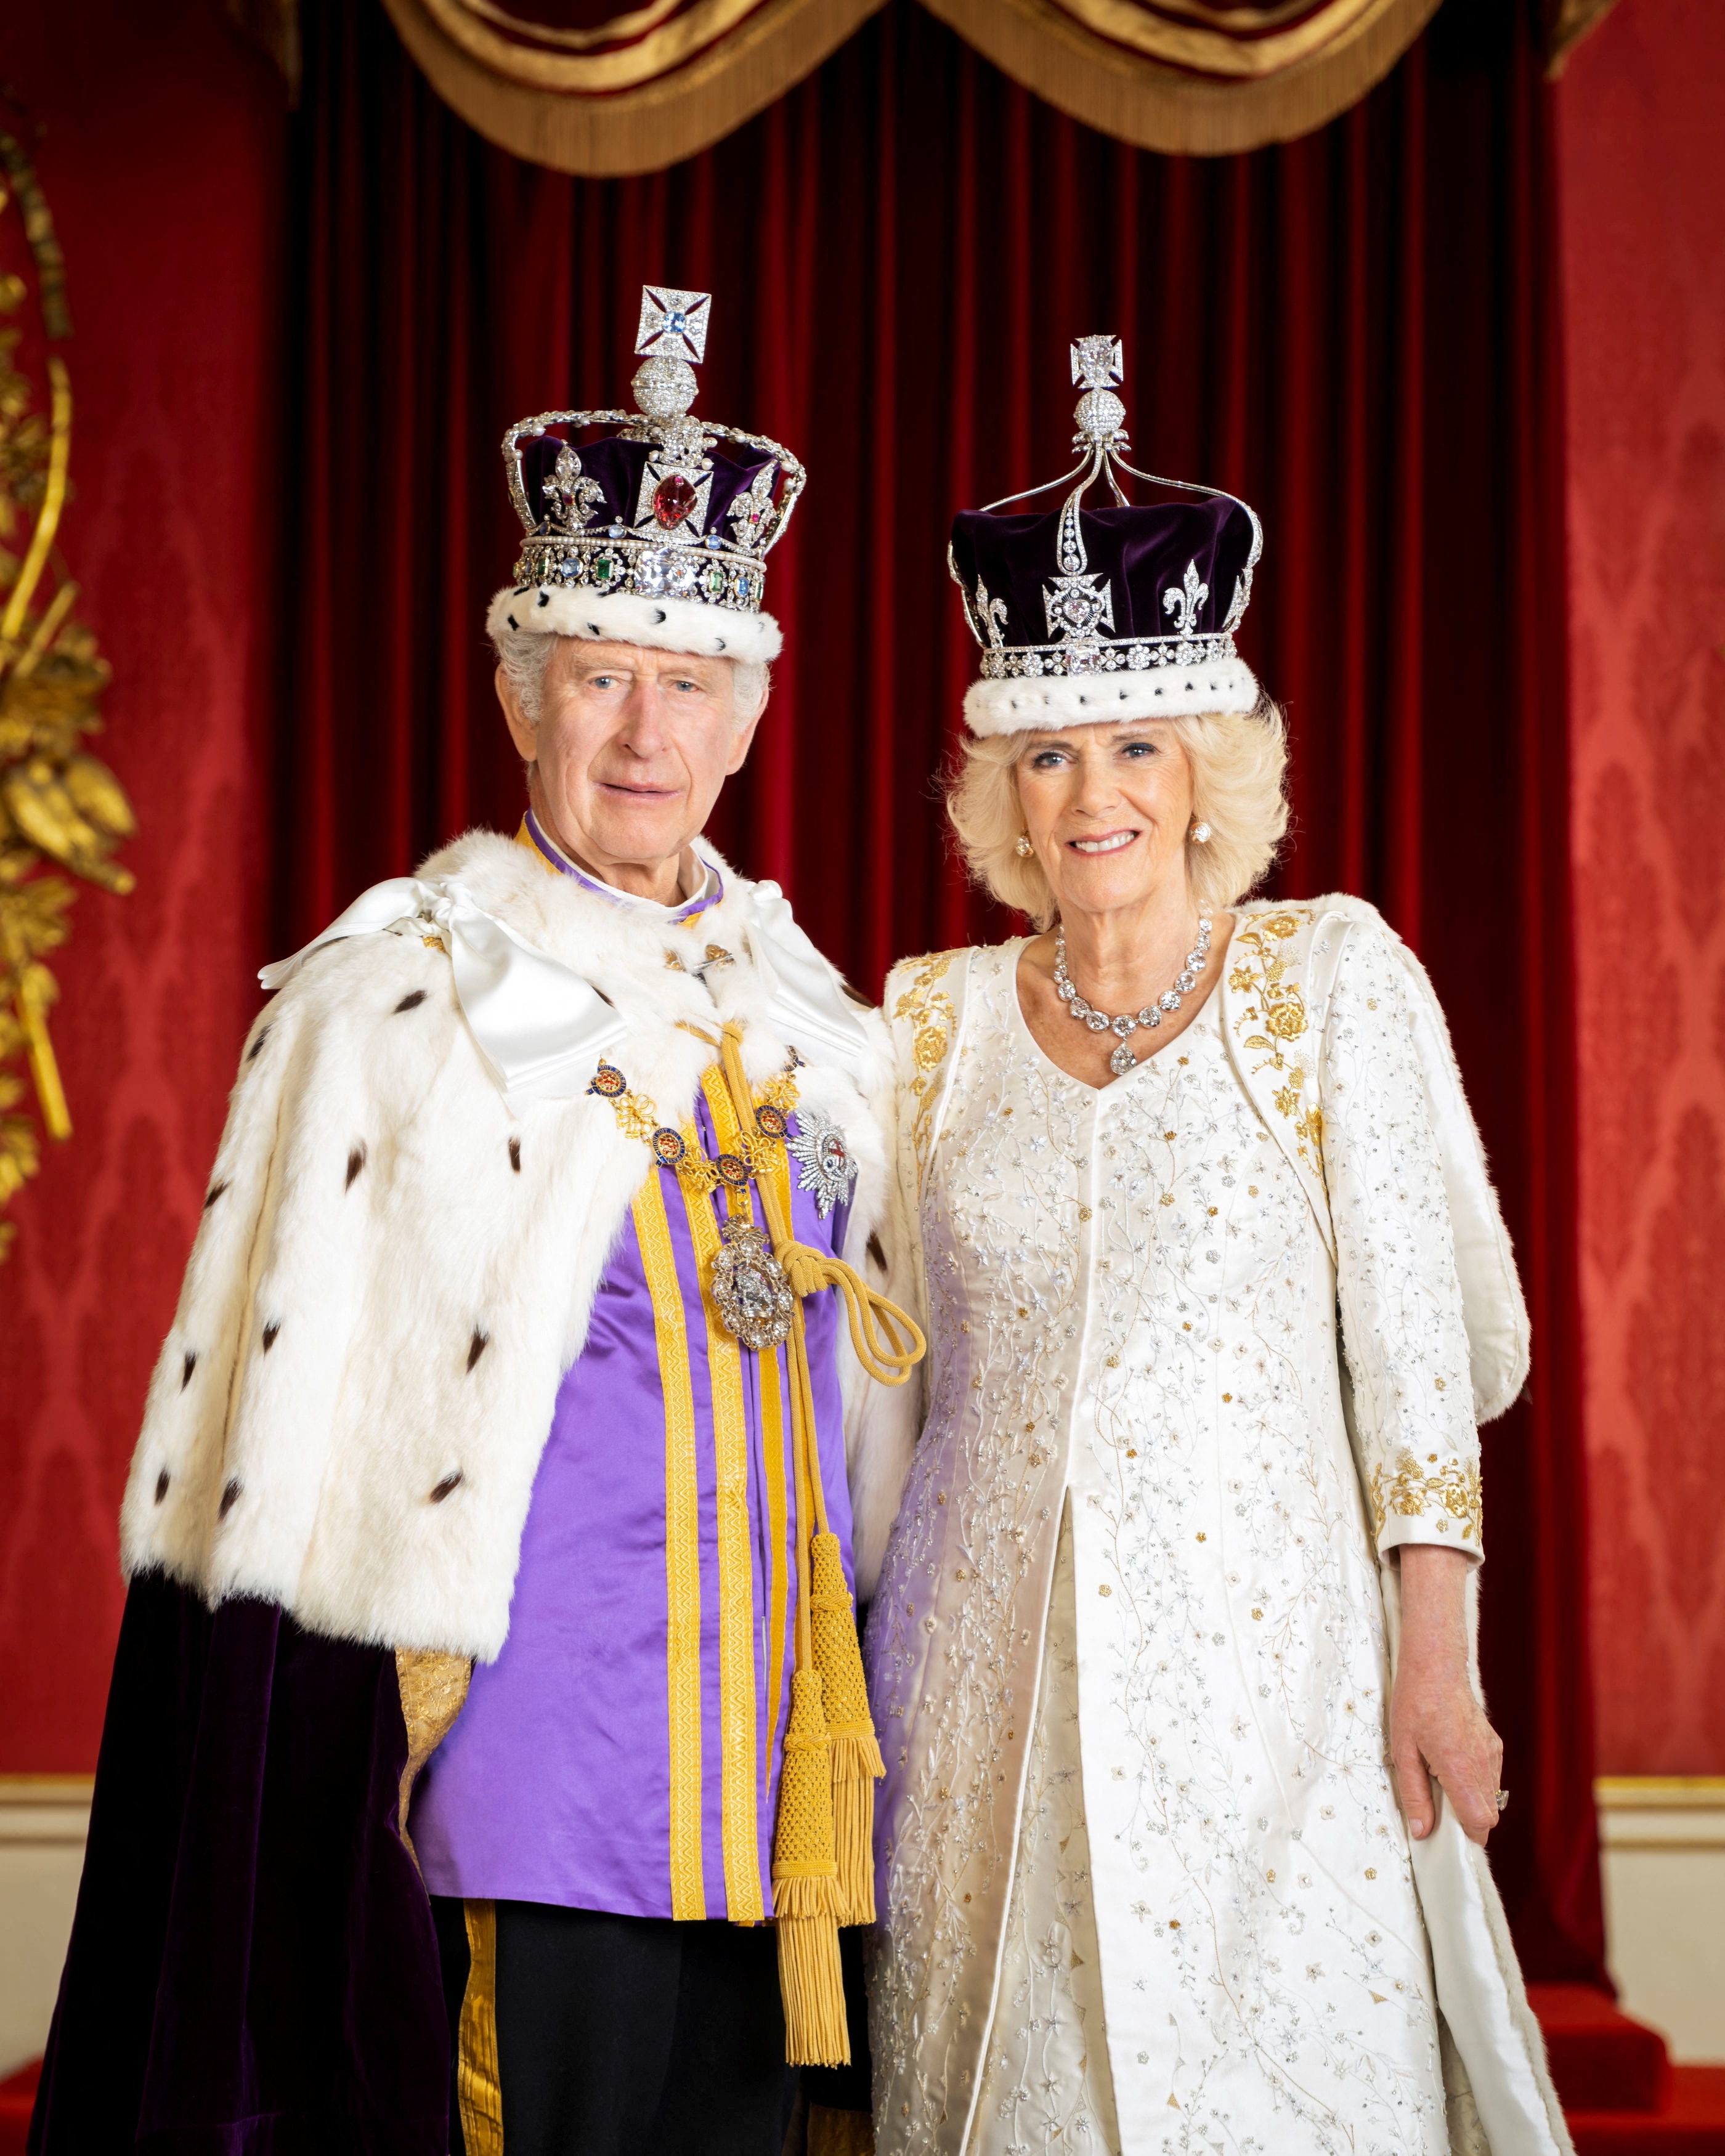 Charles and Camilla smile in their crowns and regalia.